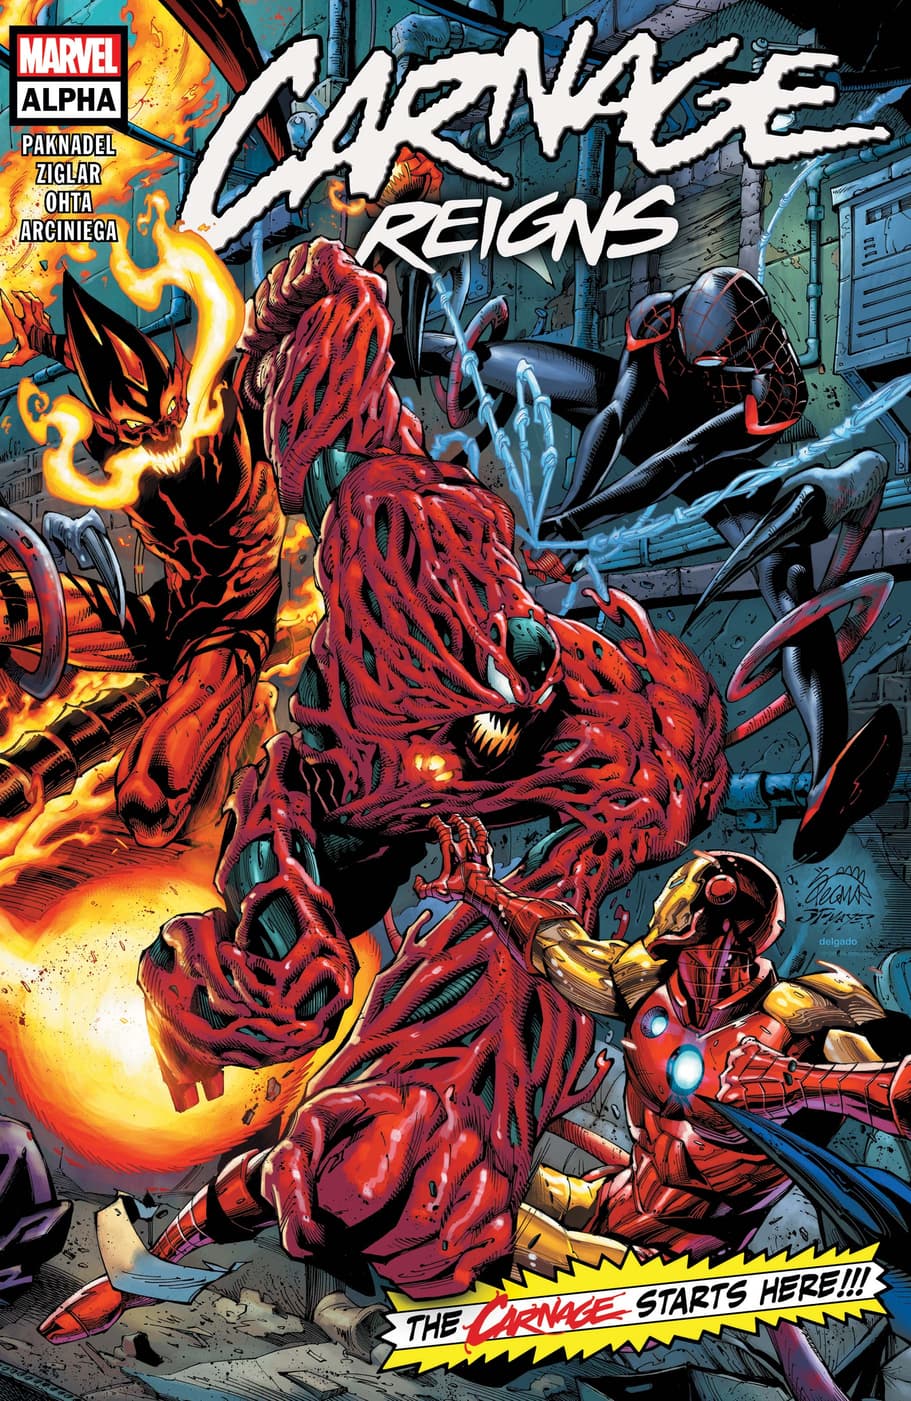 CARNAGE REIGNS ALPHA (2023) #1 cover by Ryan Stegman